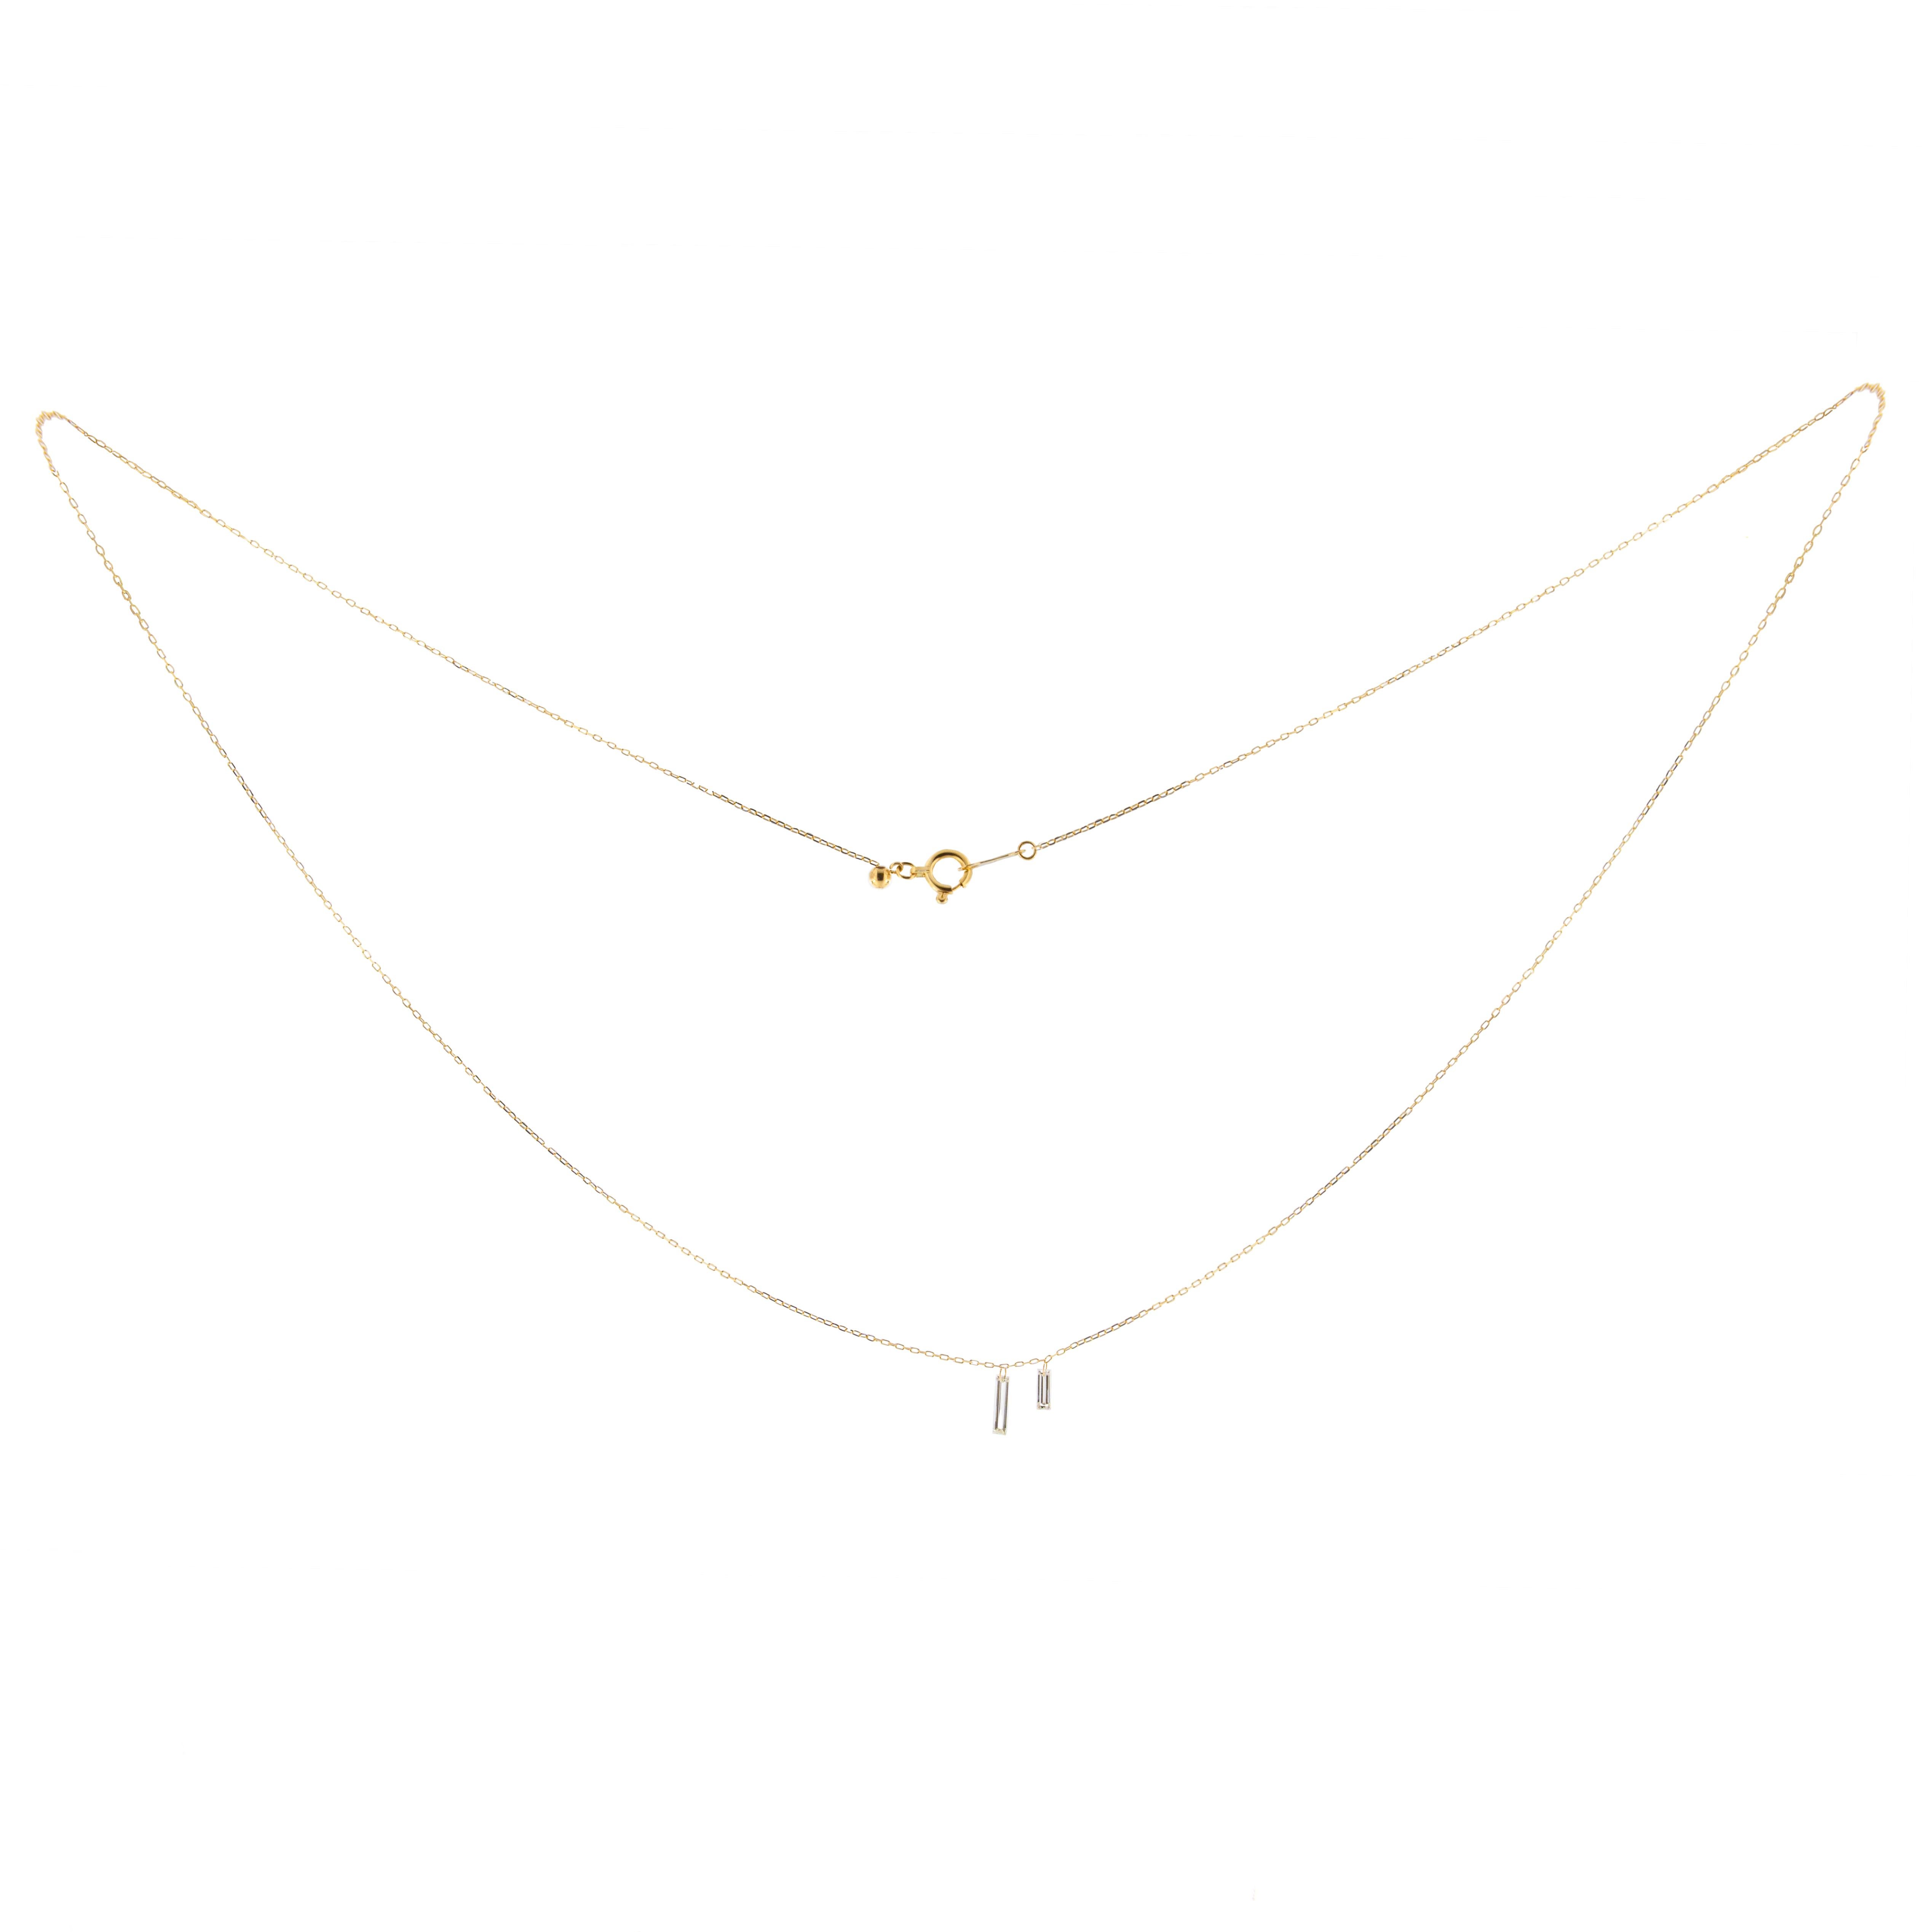 Jona design collection, hand crafted in Italy, 18 karat yellow gold Necklace suspending 2 drilled Baguette cut White Diamonds weighing 0.16 carats in total, G color,  VS2 clarity. Chain Length : 45 cm / 17. 71 in.
All Jona jewelry is new and has